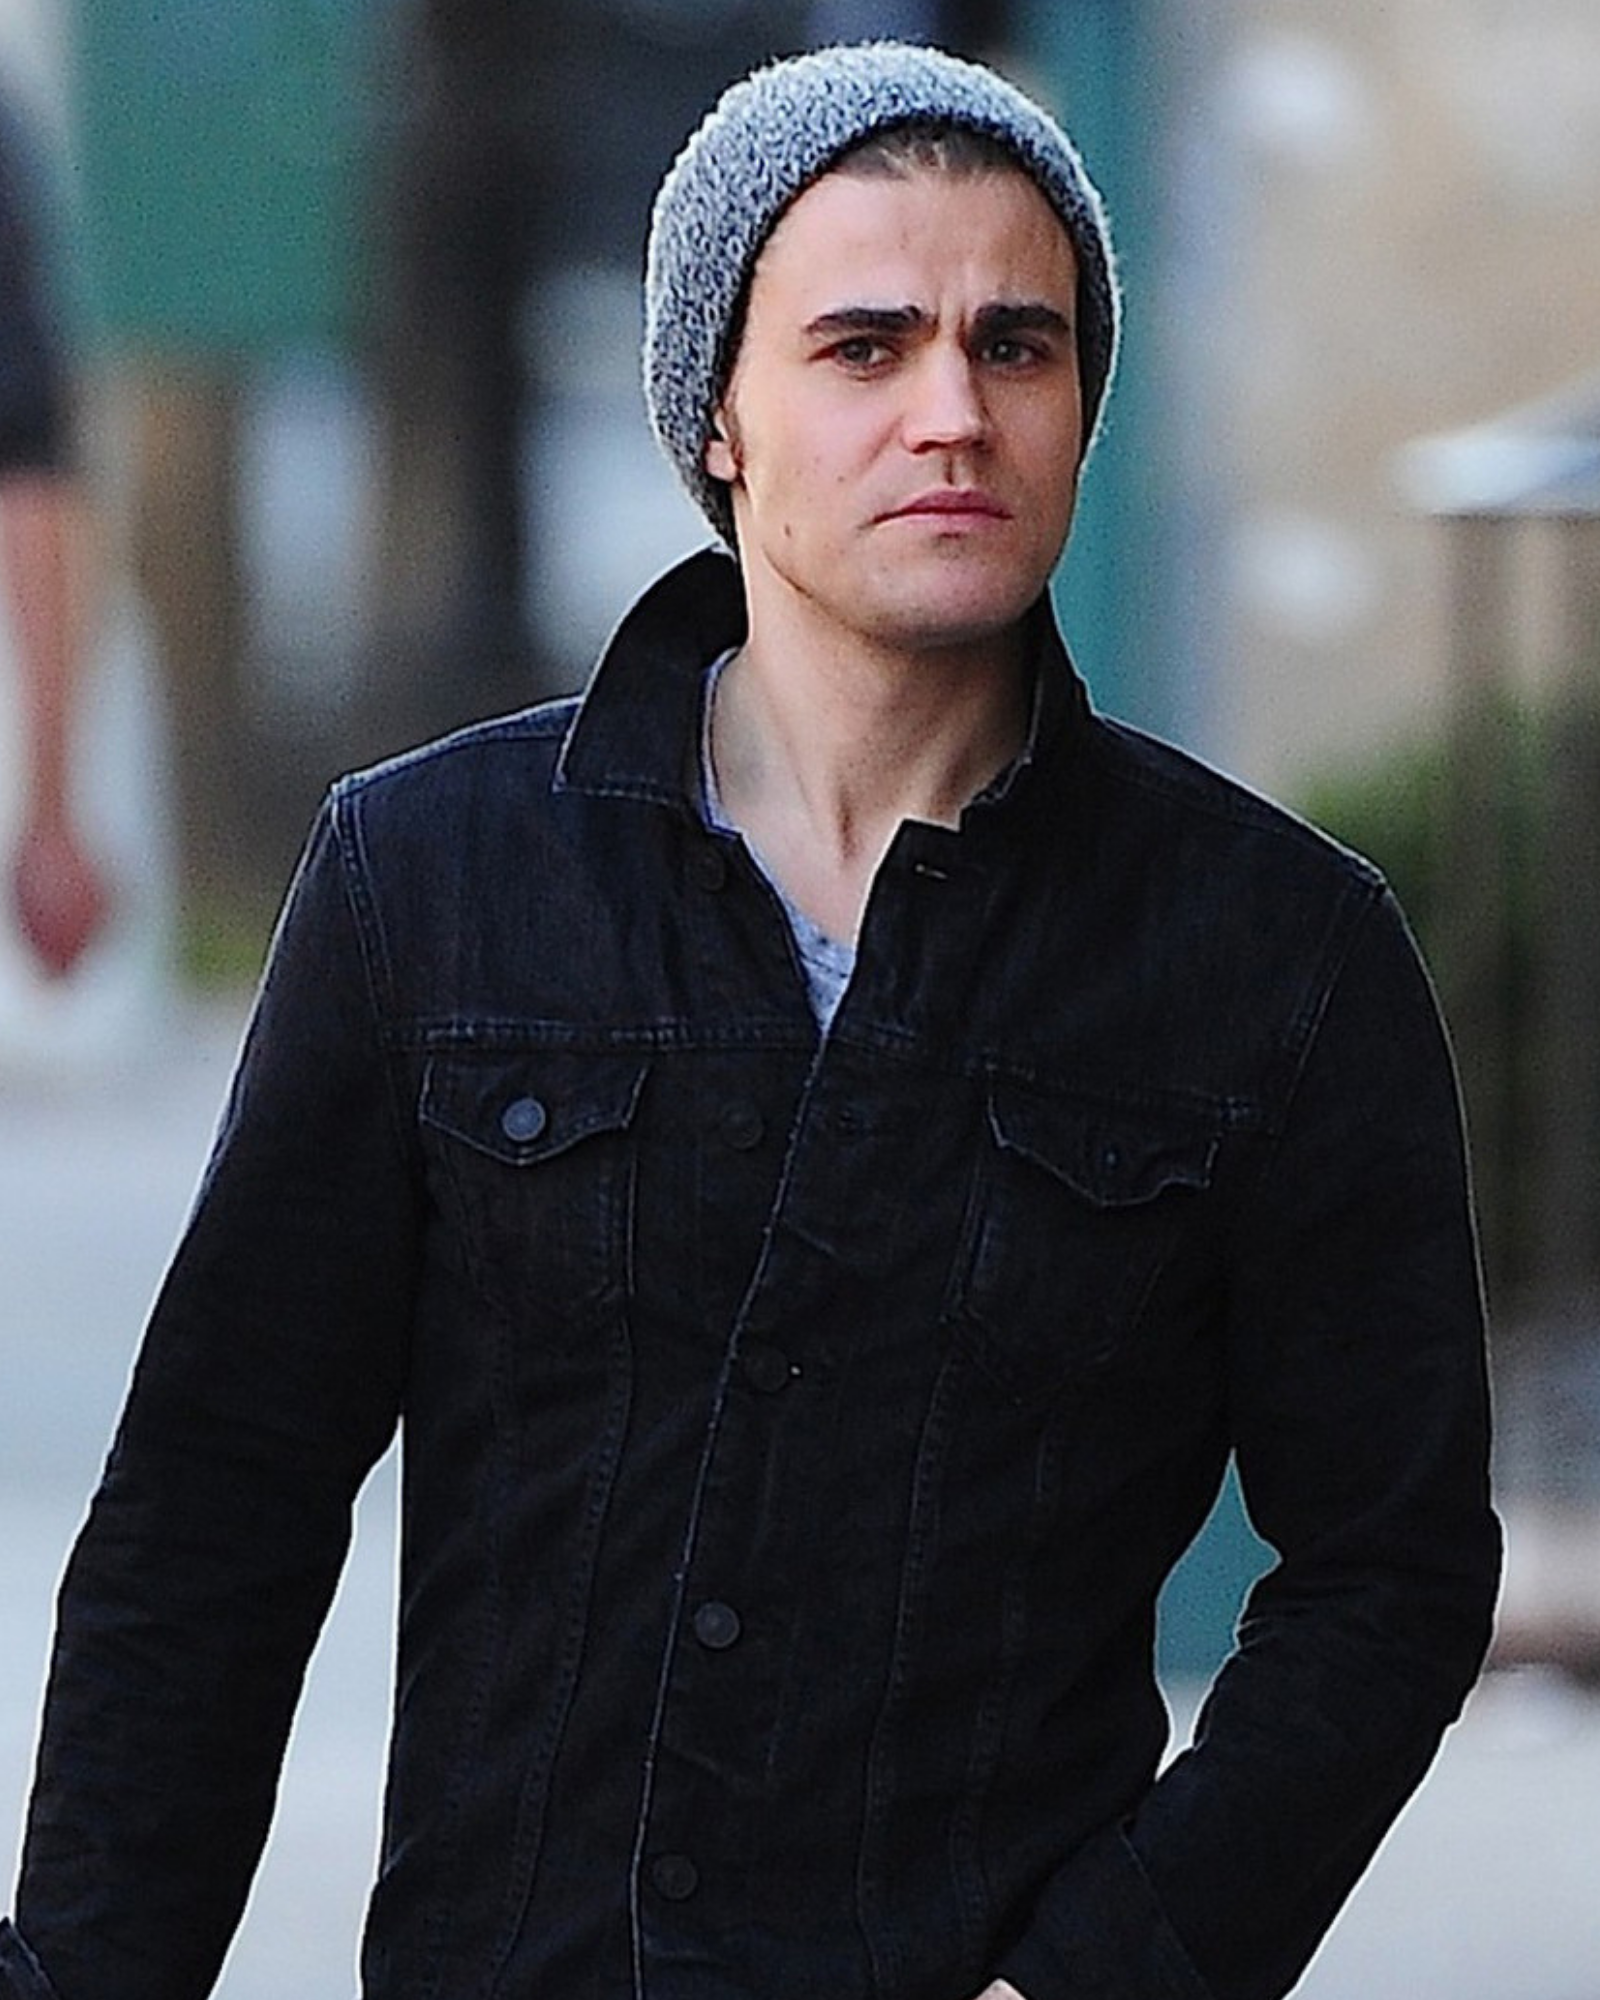 http://www.justjaredjr.com/photo-gallery/607472/paul-wesley-steps-out-in-nyc-02/